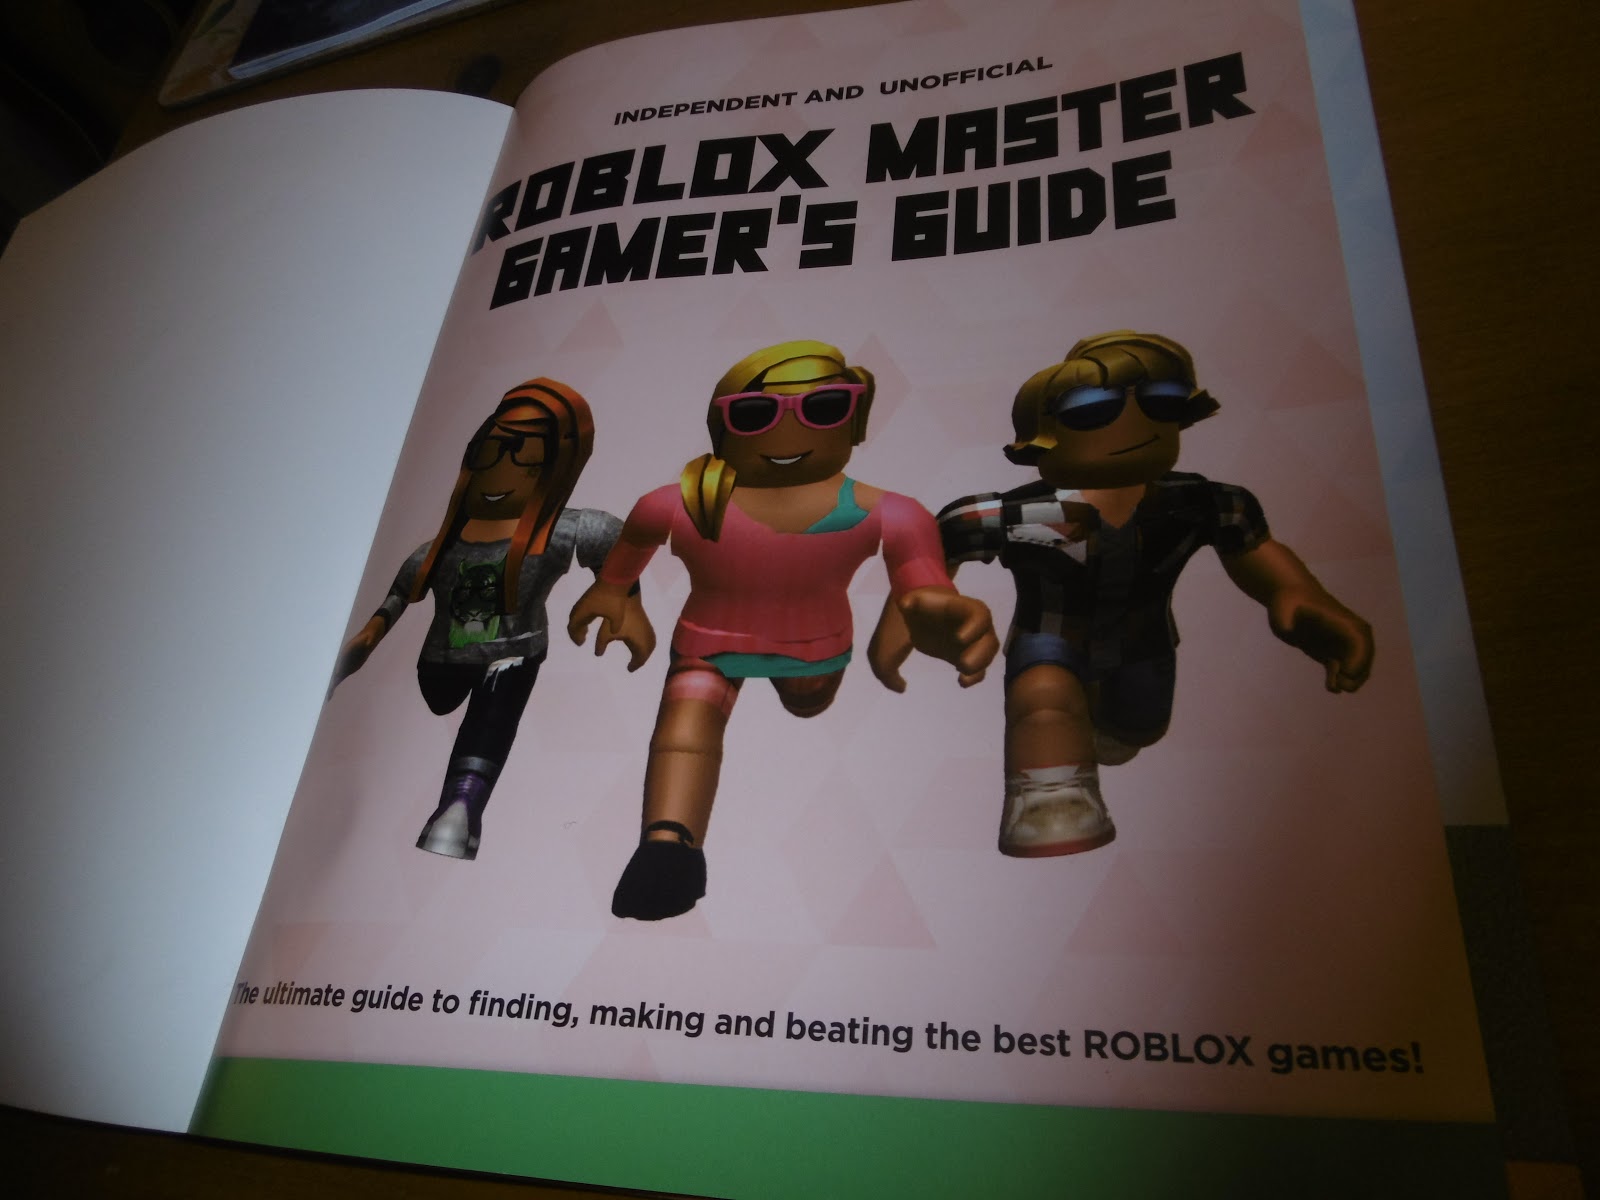 Madhouse Family Reviews Giveaway 701 Win Roblox Master Gamer S Guide Closed Winner Julie Ward - roblox help guide